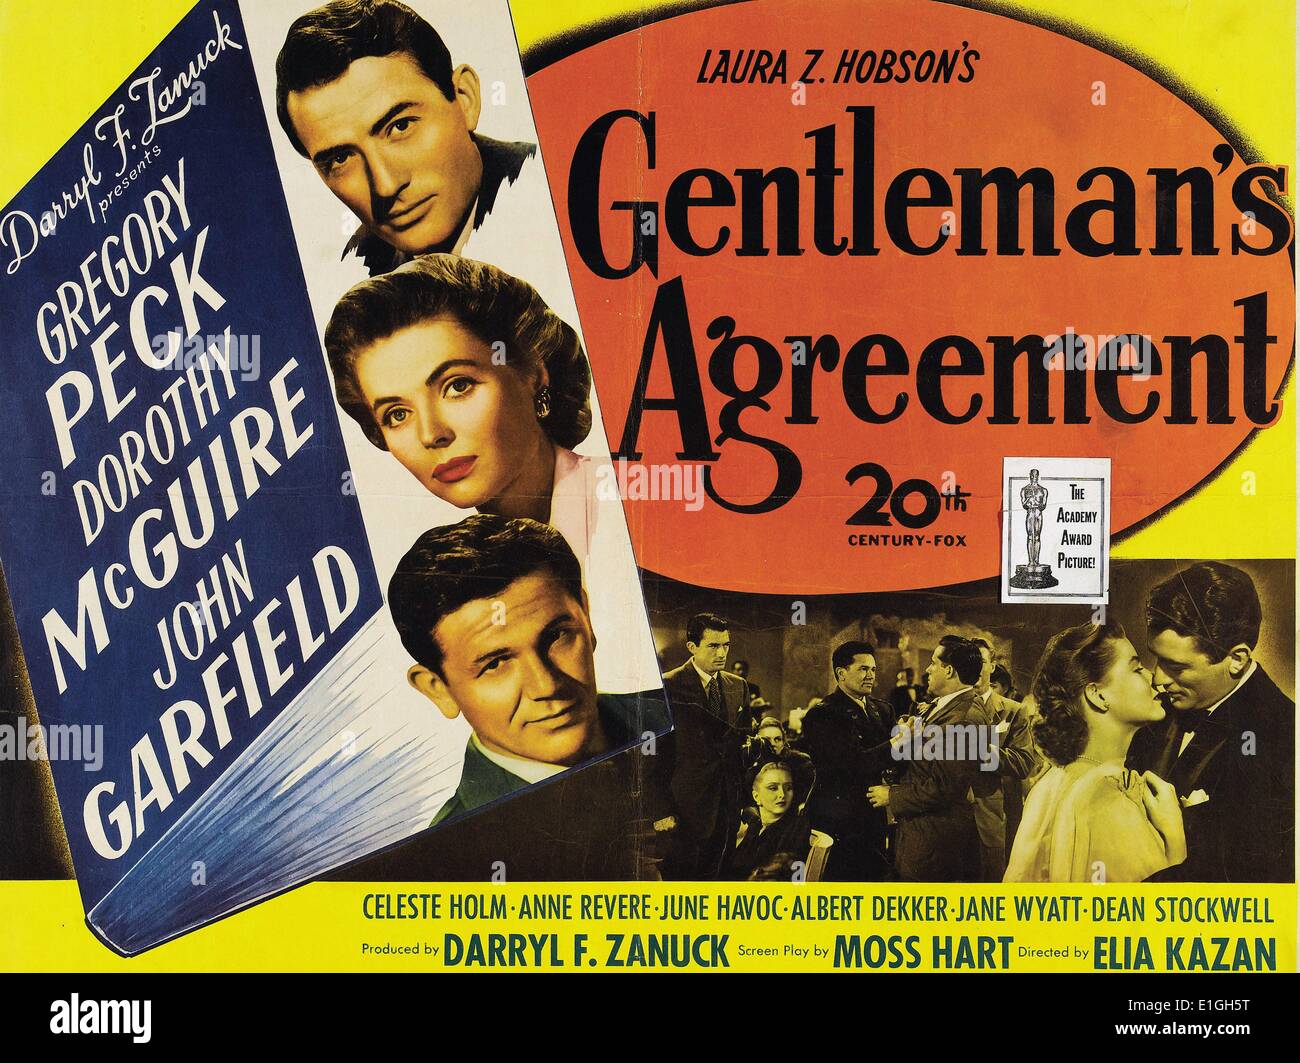 Gentleman's Agreement, a 1947 drama film starring Gregory Peck, Dorothy McGuire and John Garfield. Stock Photo